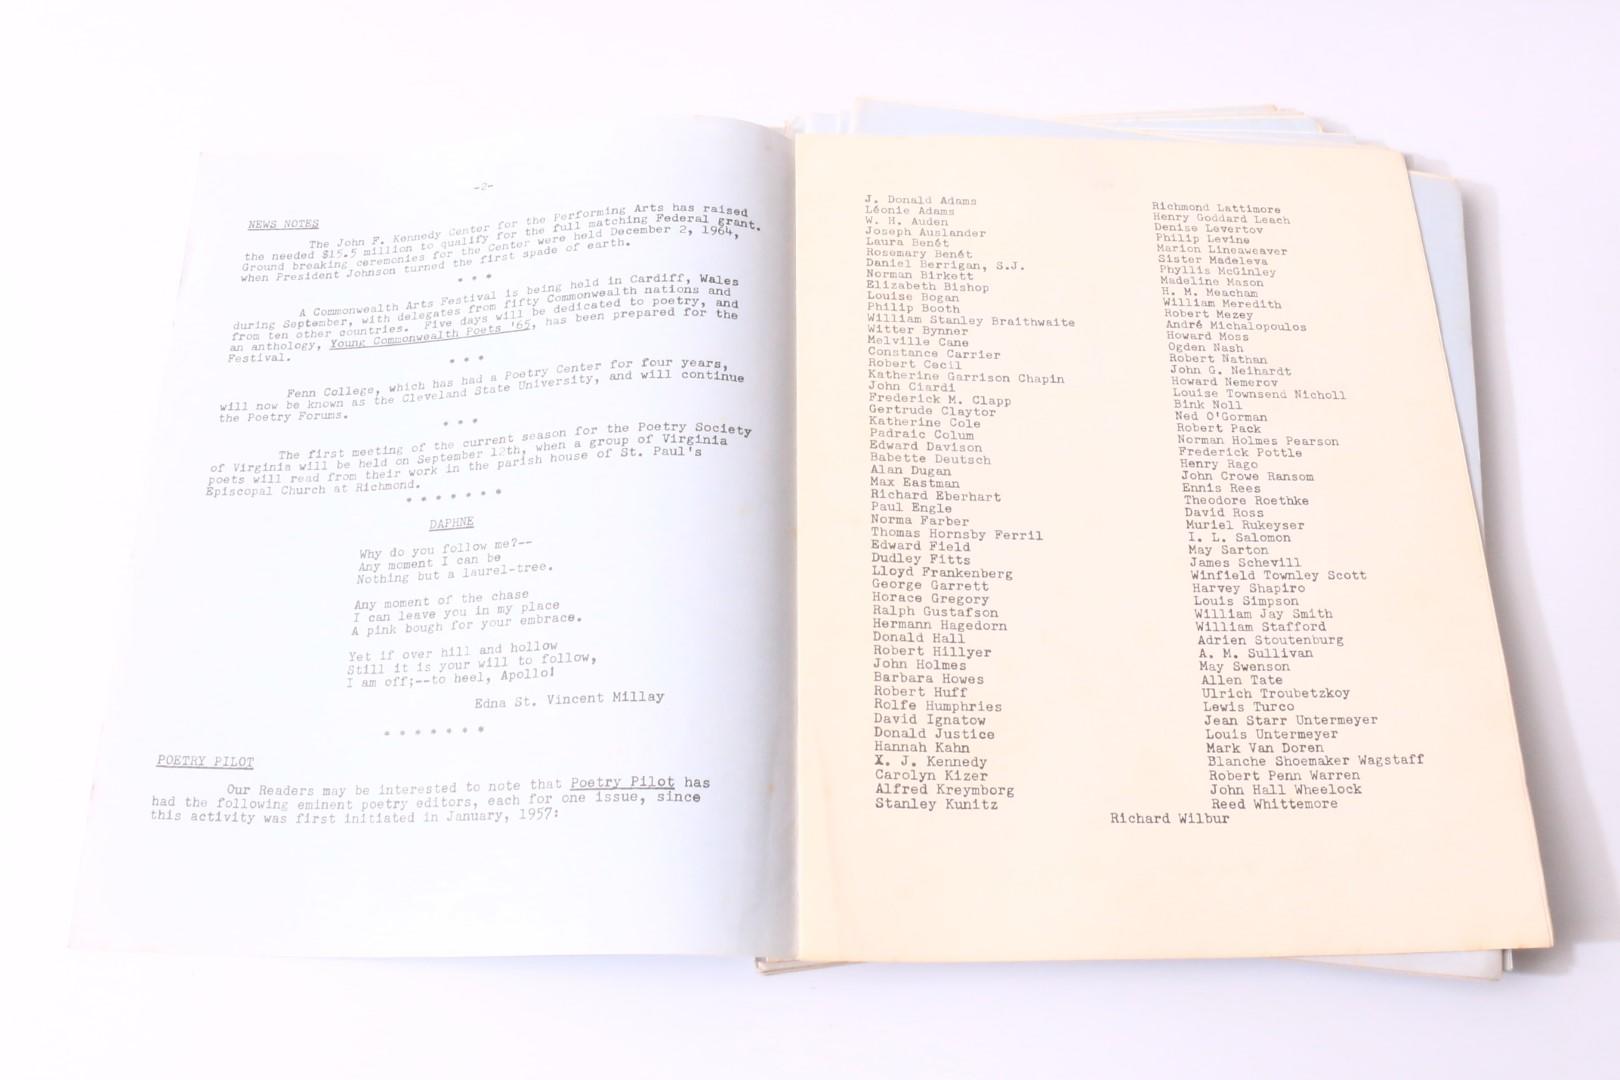 Various - Poetry Pilot: September 1965 to February 1967 - The Academy of American Poets, 1965-1967, .